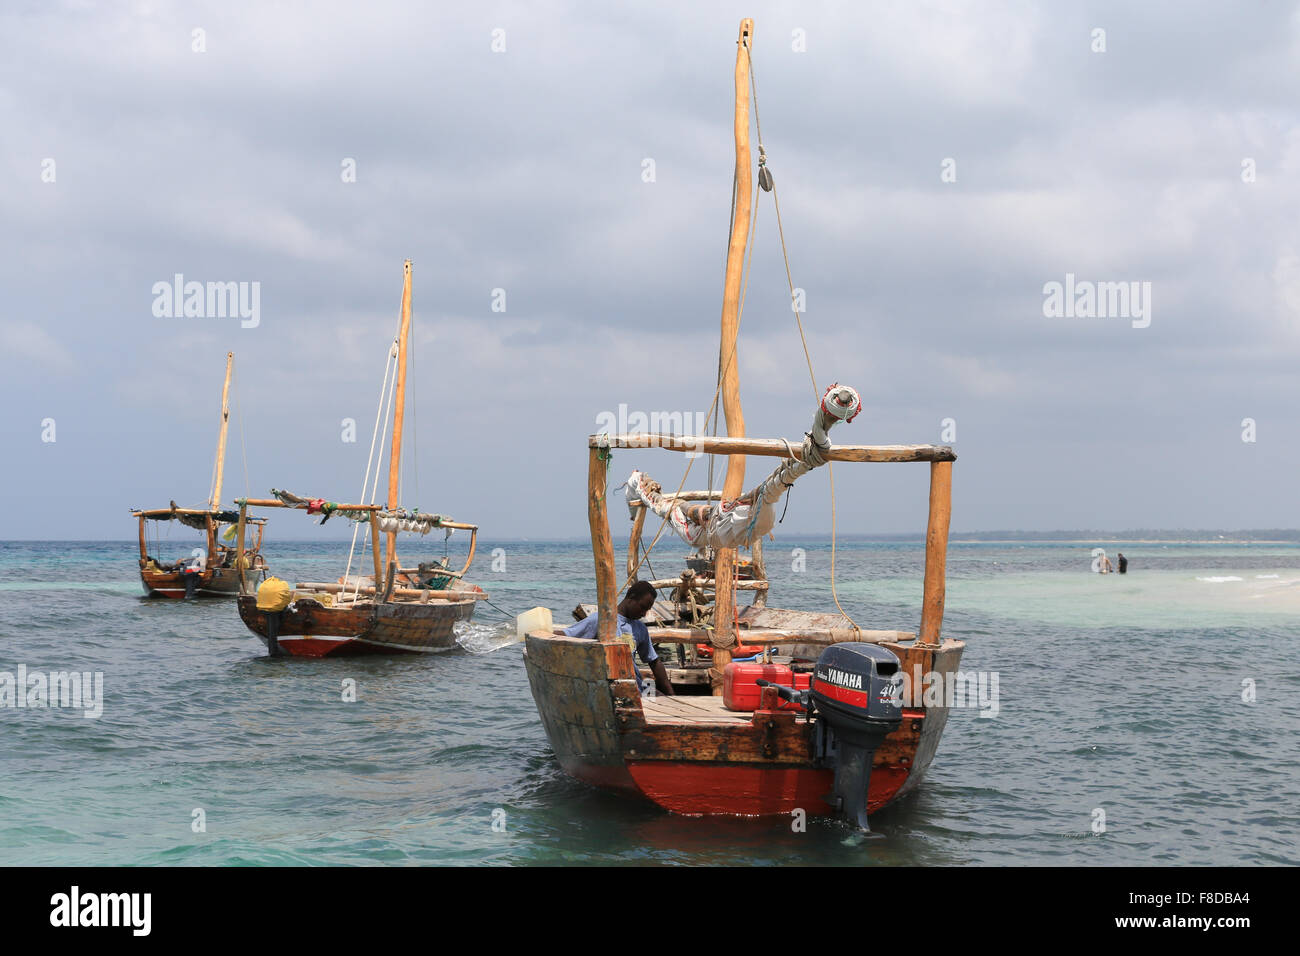 Man bailing water from a dhow anchored near tiny islet north of Kwale Island and south of Zanzibar, Tanzania, East Africa. Stock Photo